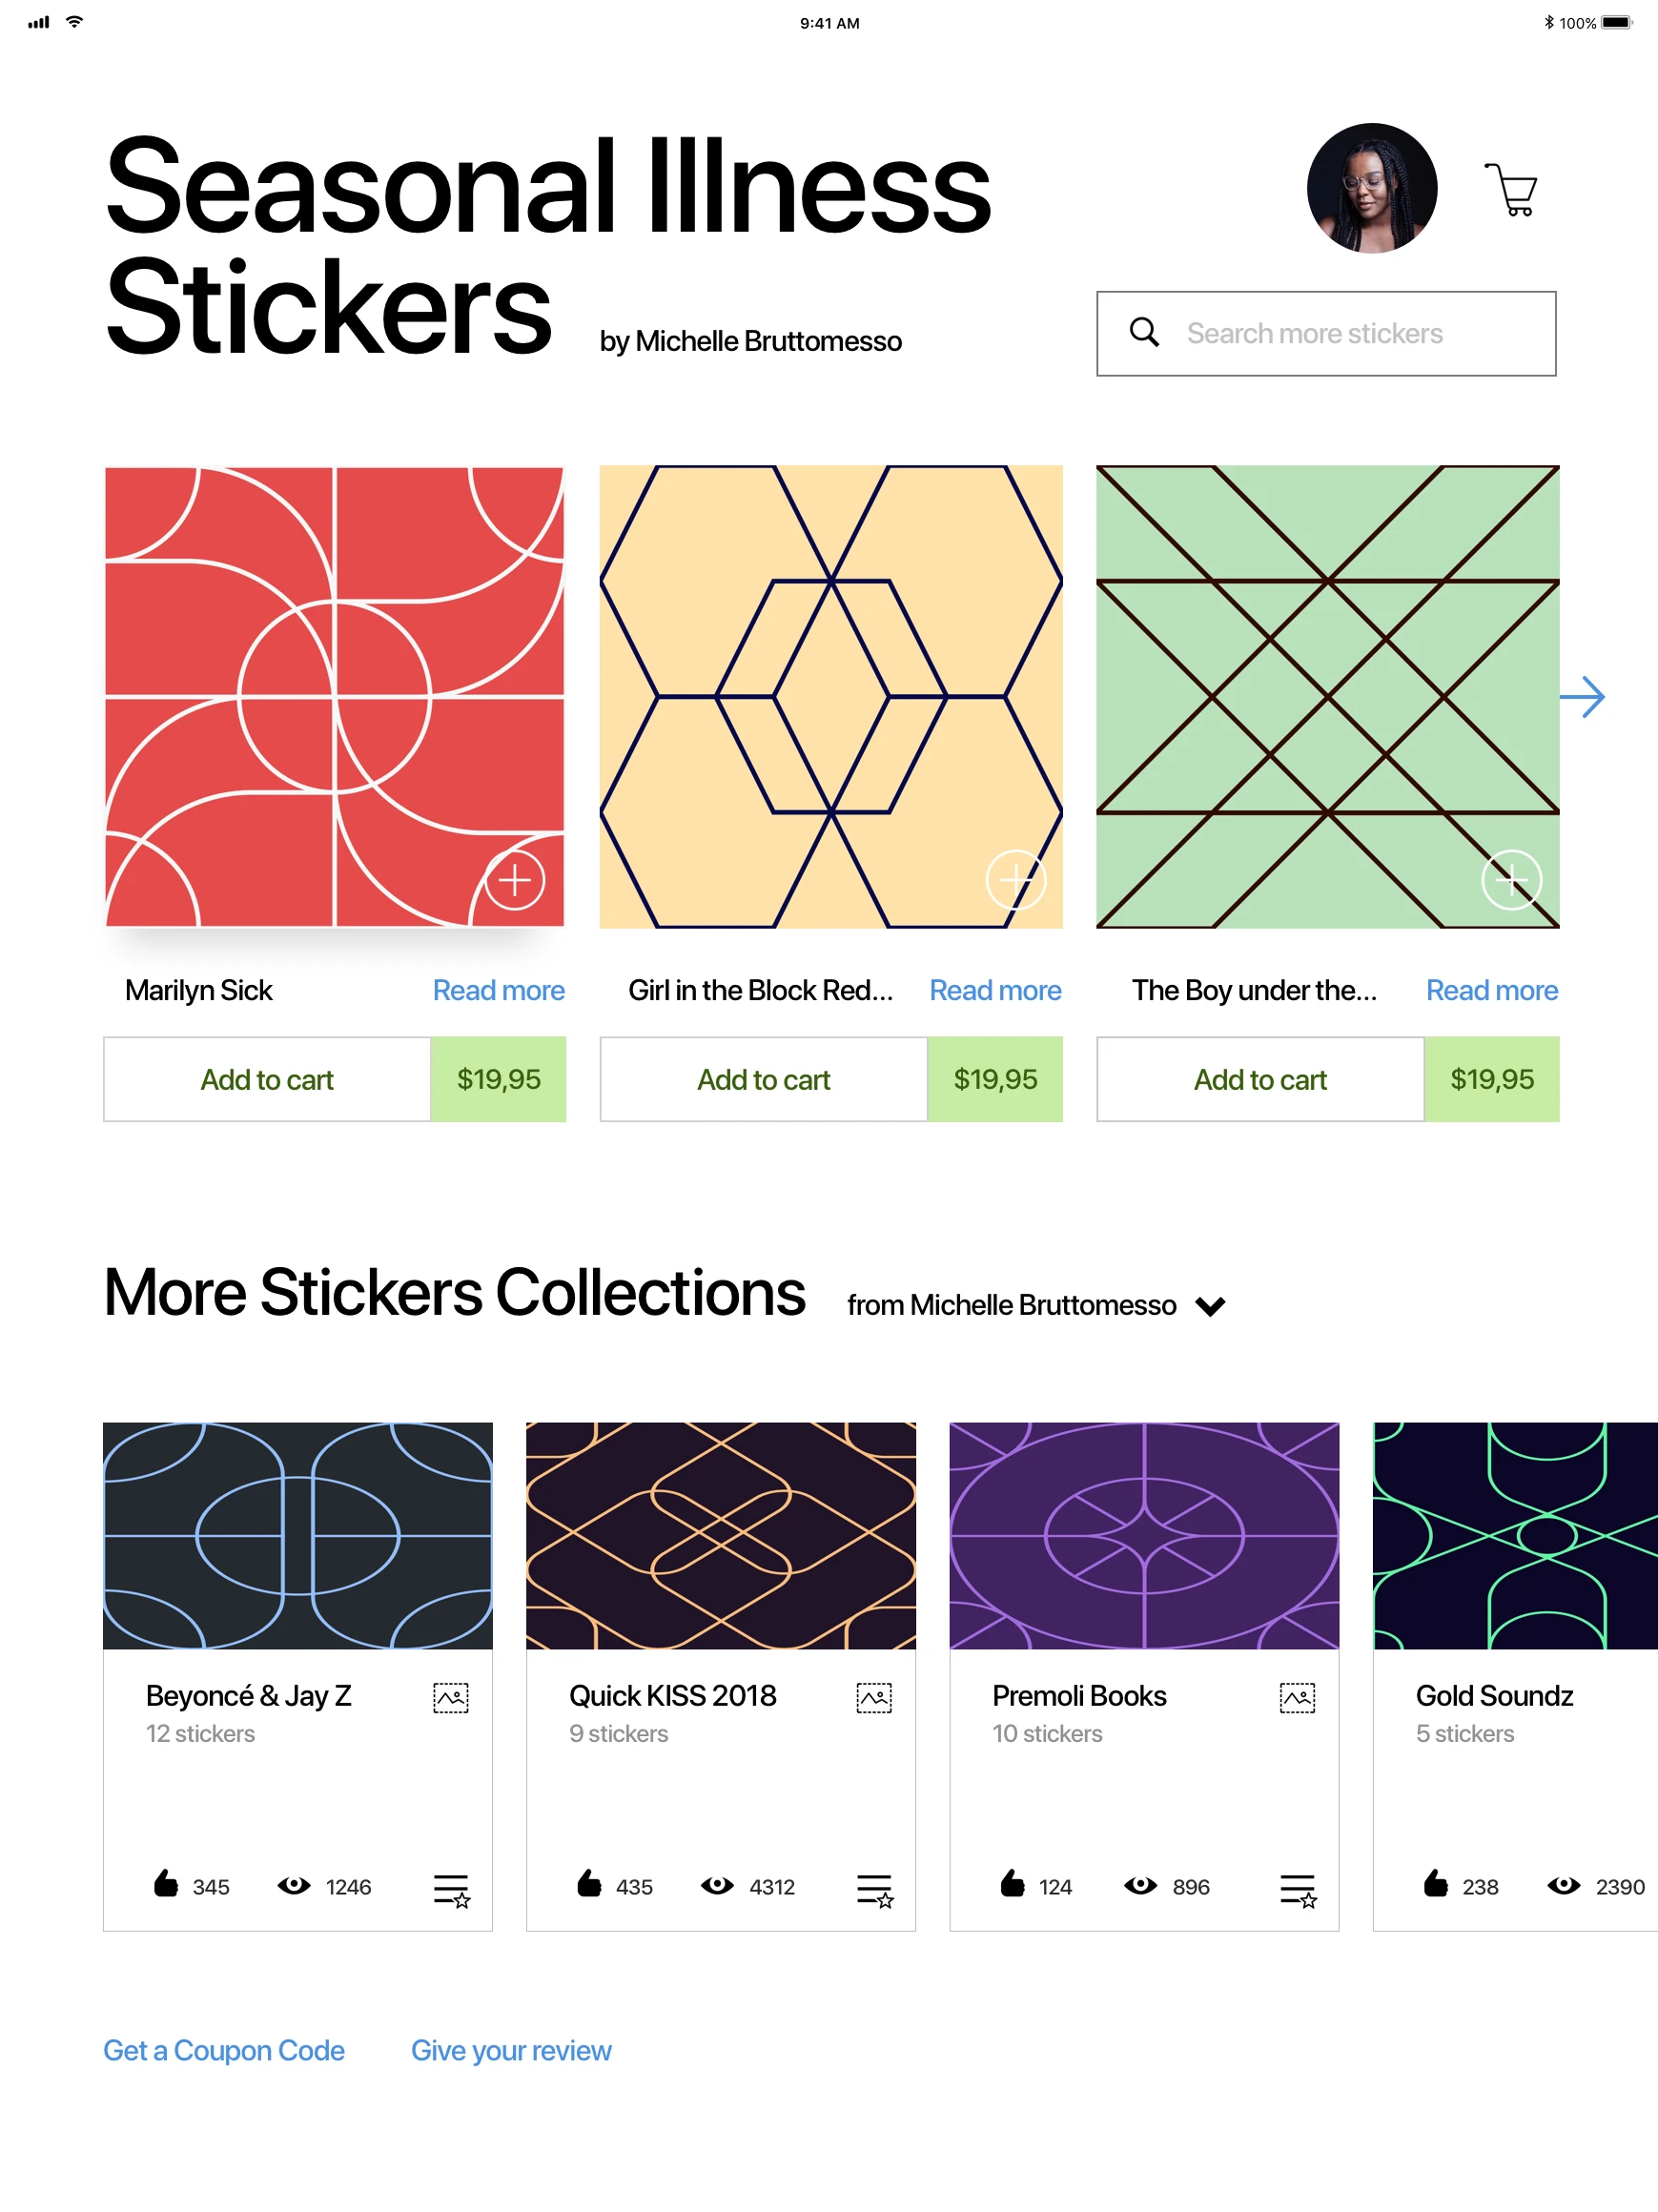 Stickers Shop App UI Kit - Stickers Shop app for the new iPad Pro. Know that the images from the preview image are not included due to copyright infringement, and are changed for tyles.